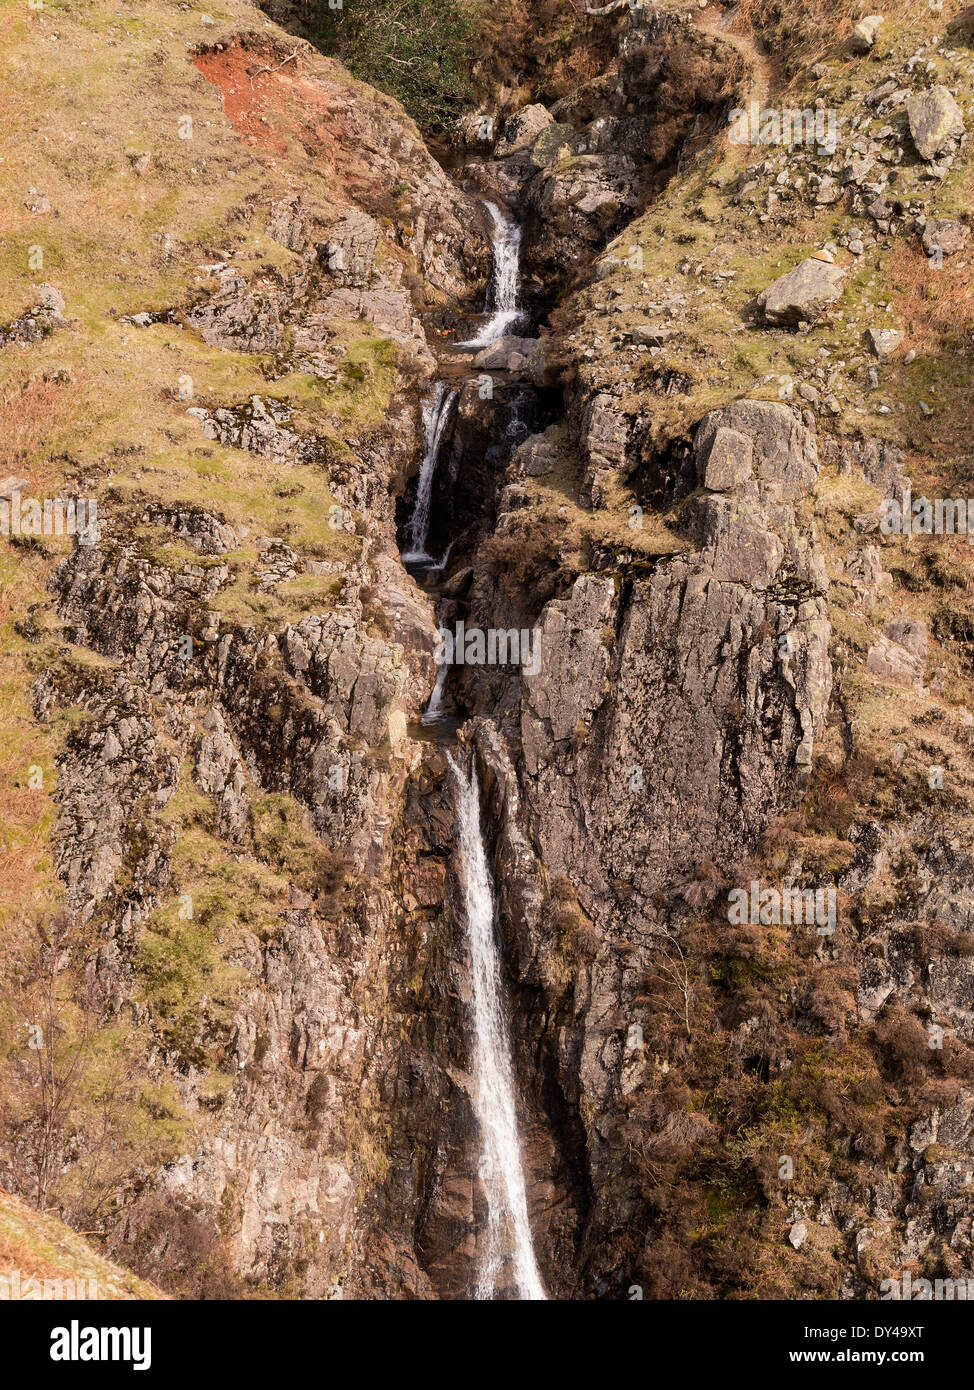 Dungeon Ghyll vigueur cascade, Langdale, Lake District, Cumbria, England, UK Banque D'Images